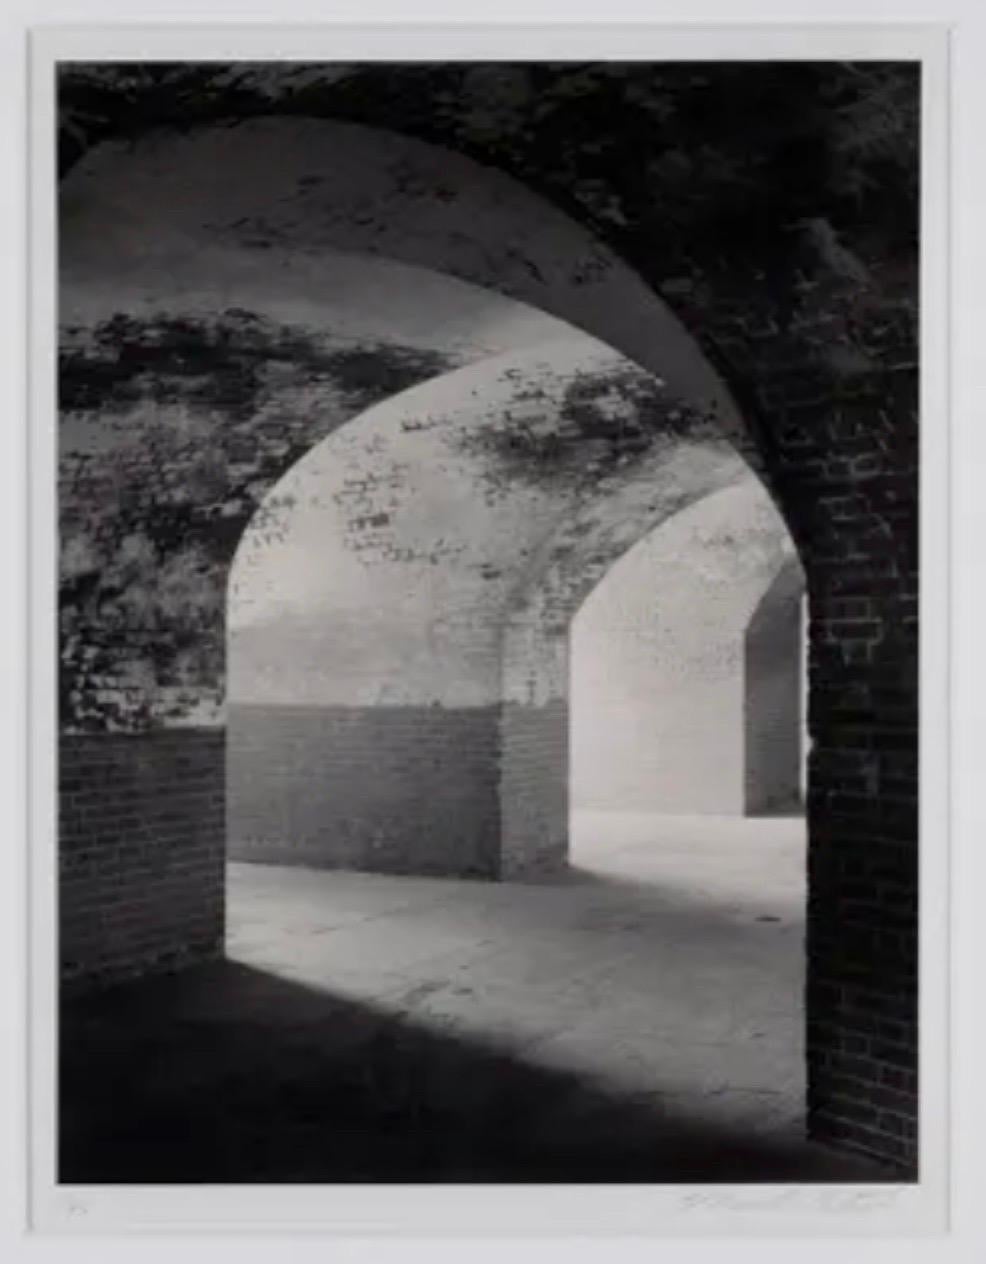 Mark Citret, American, b. 1949.
"Third Story Arches", Fort Point, 1998
Silver gelatin print hand signed and editioned 1/45 in pencil along lower edge.
Published: "Along the Way" Mark Citret, Published Custom & Limited Editions, San Francisco, 1999.